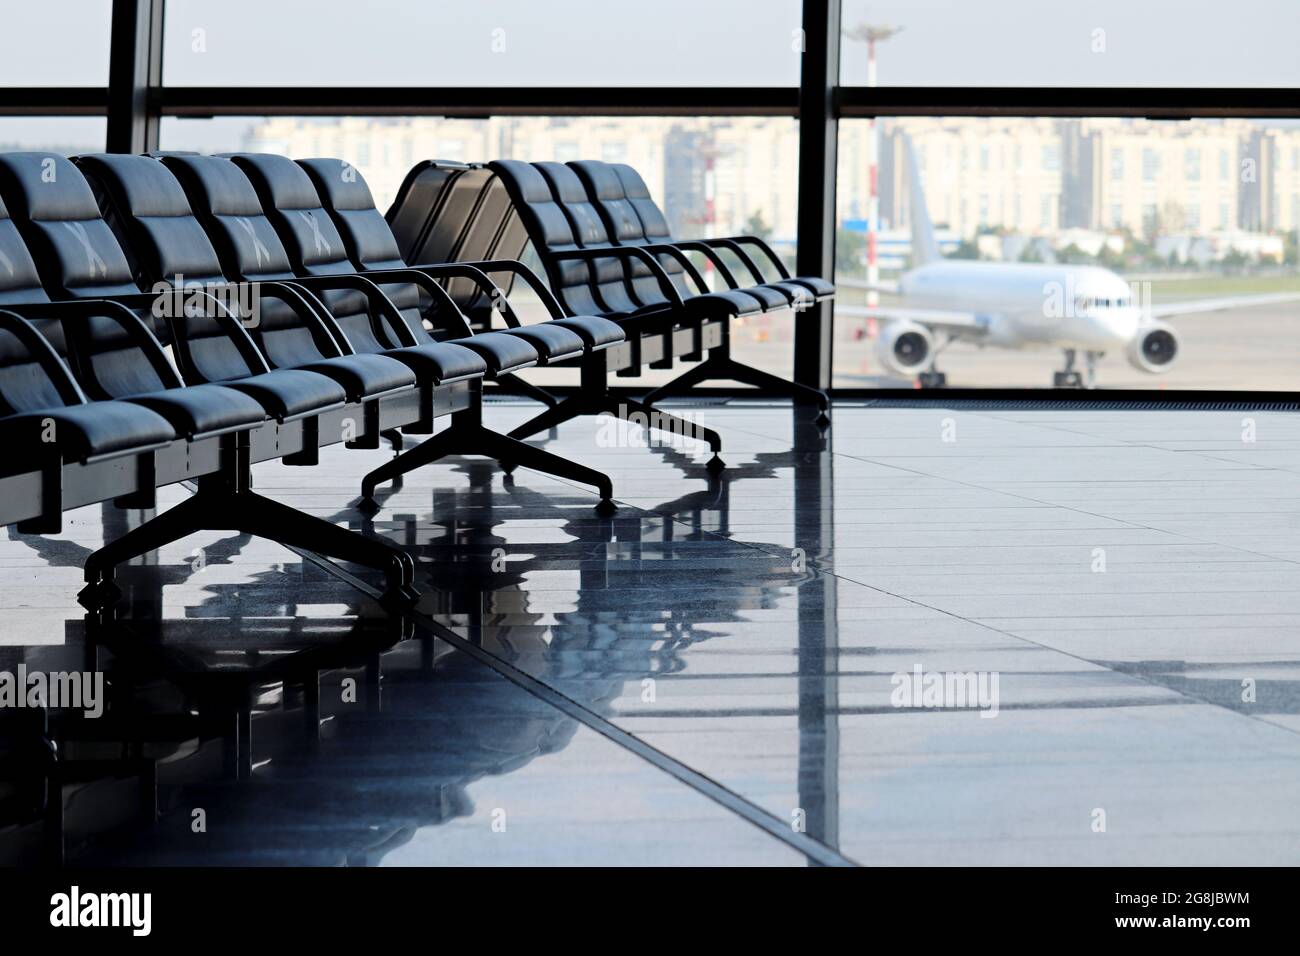 Empty waiting chairs in the airport building against the plane on runway. Travel during quarantine at coronavirus pandemic Stock Photo